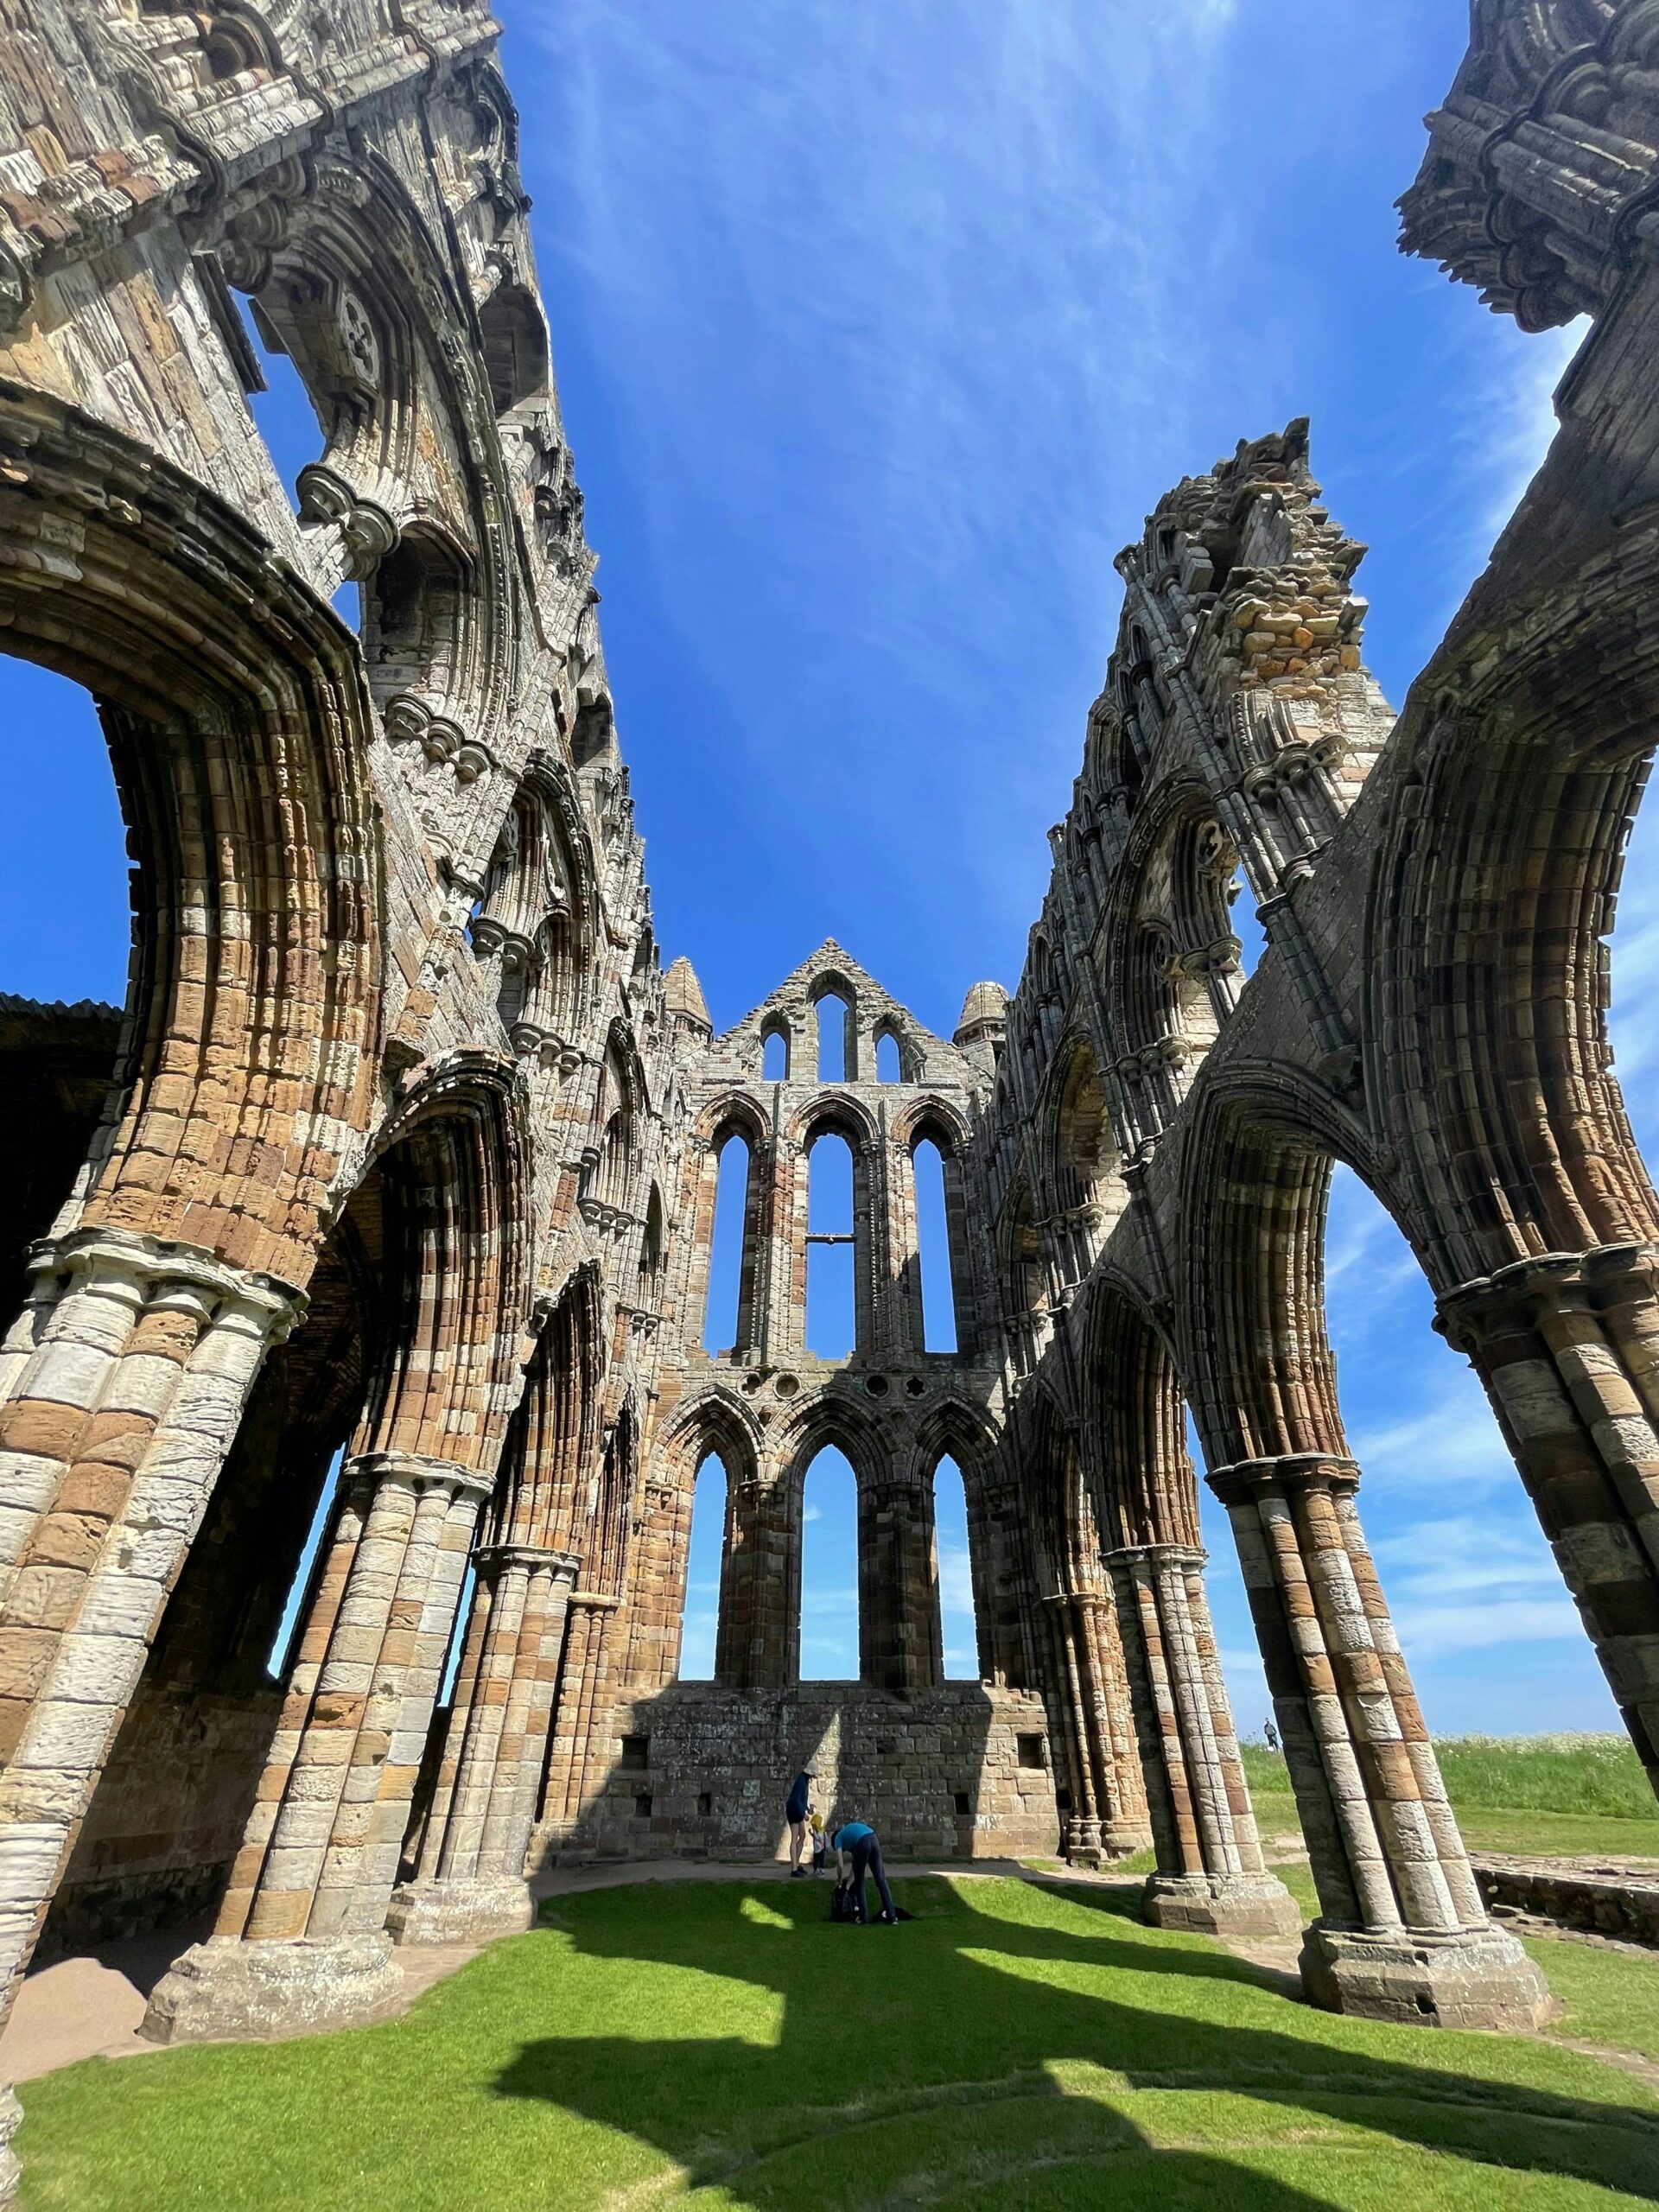 Whitby Abbey, an iconic landmark in North Yorkshire